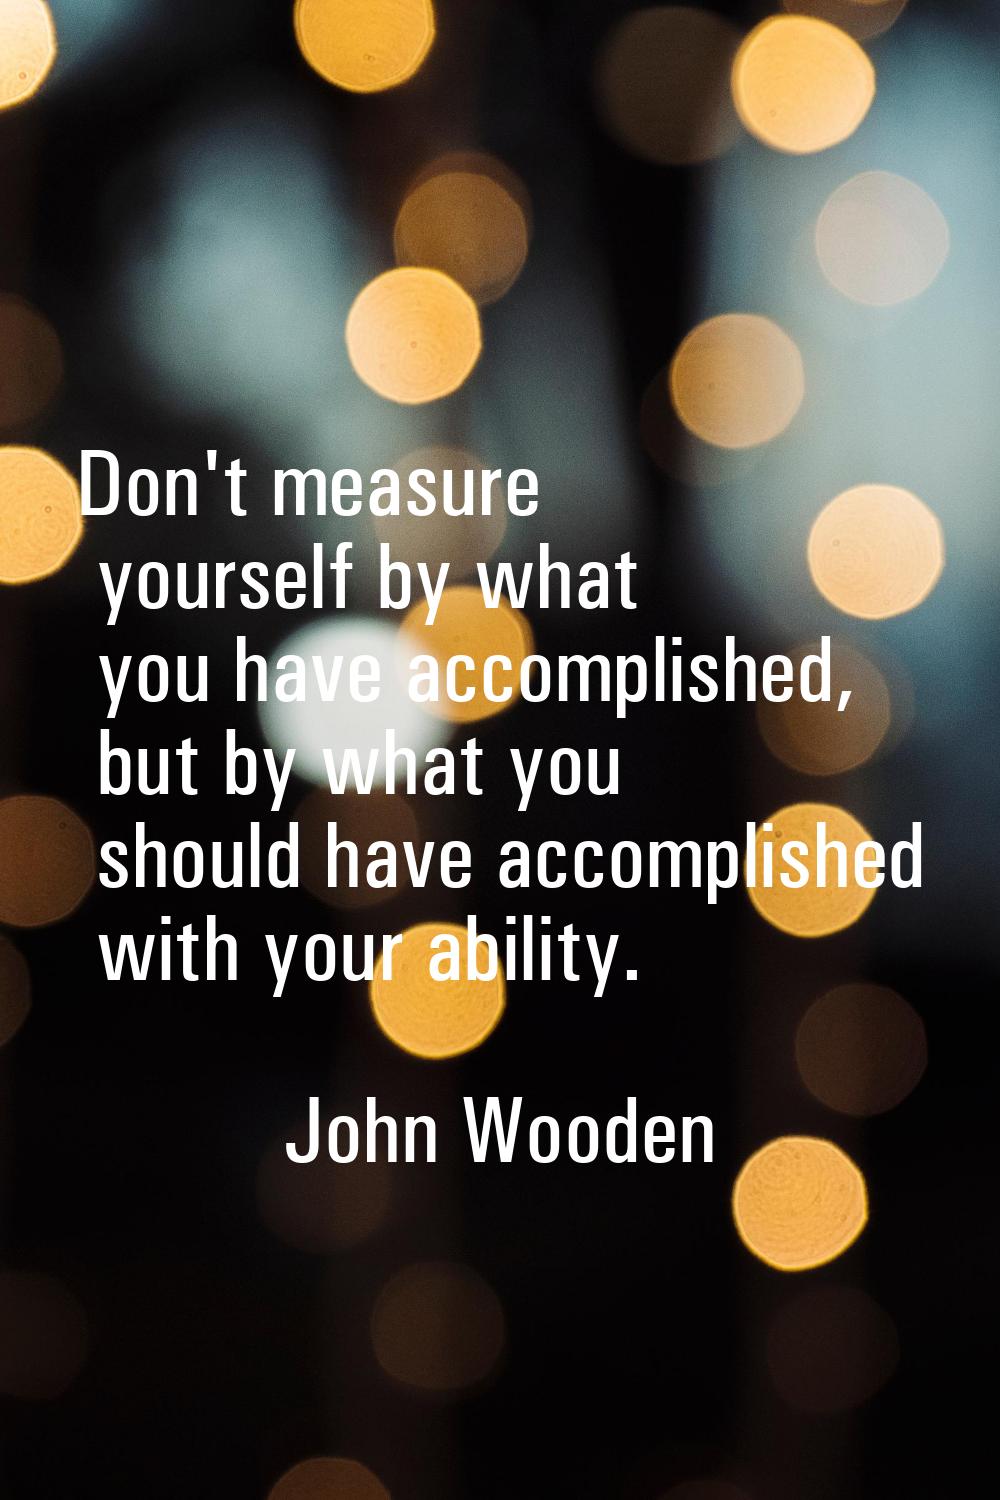 Don't measure yourself by what you have accomplished, but by what you should have accomplished with